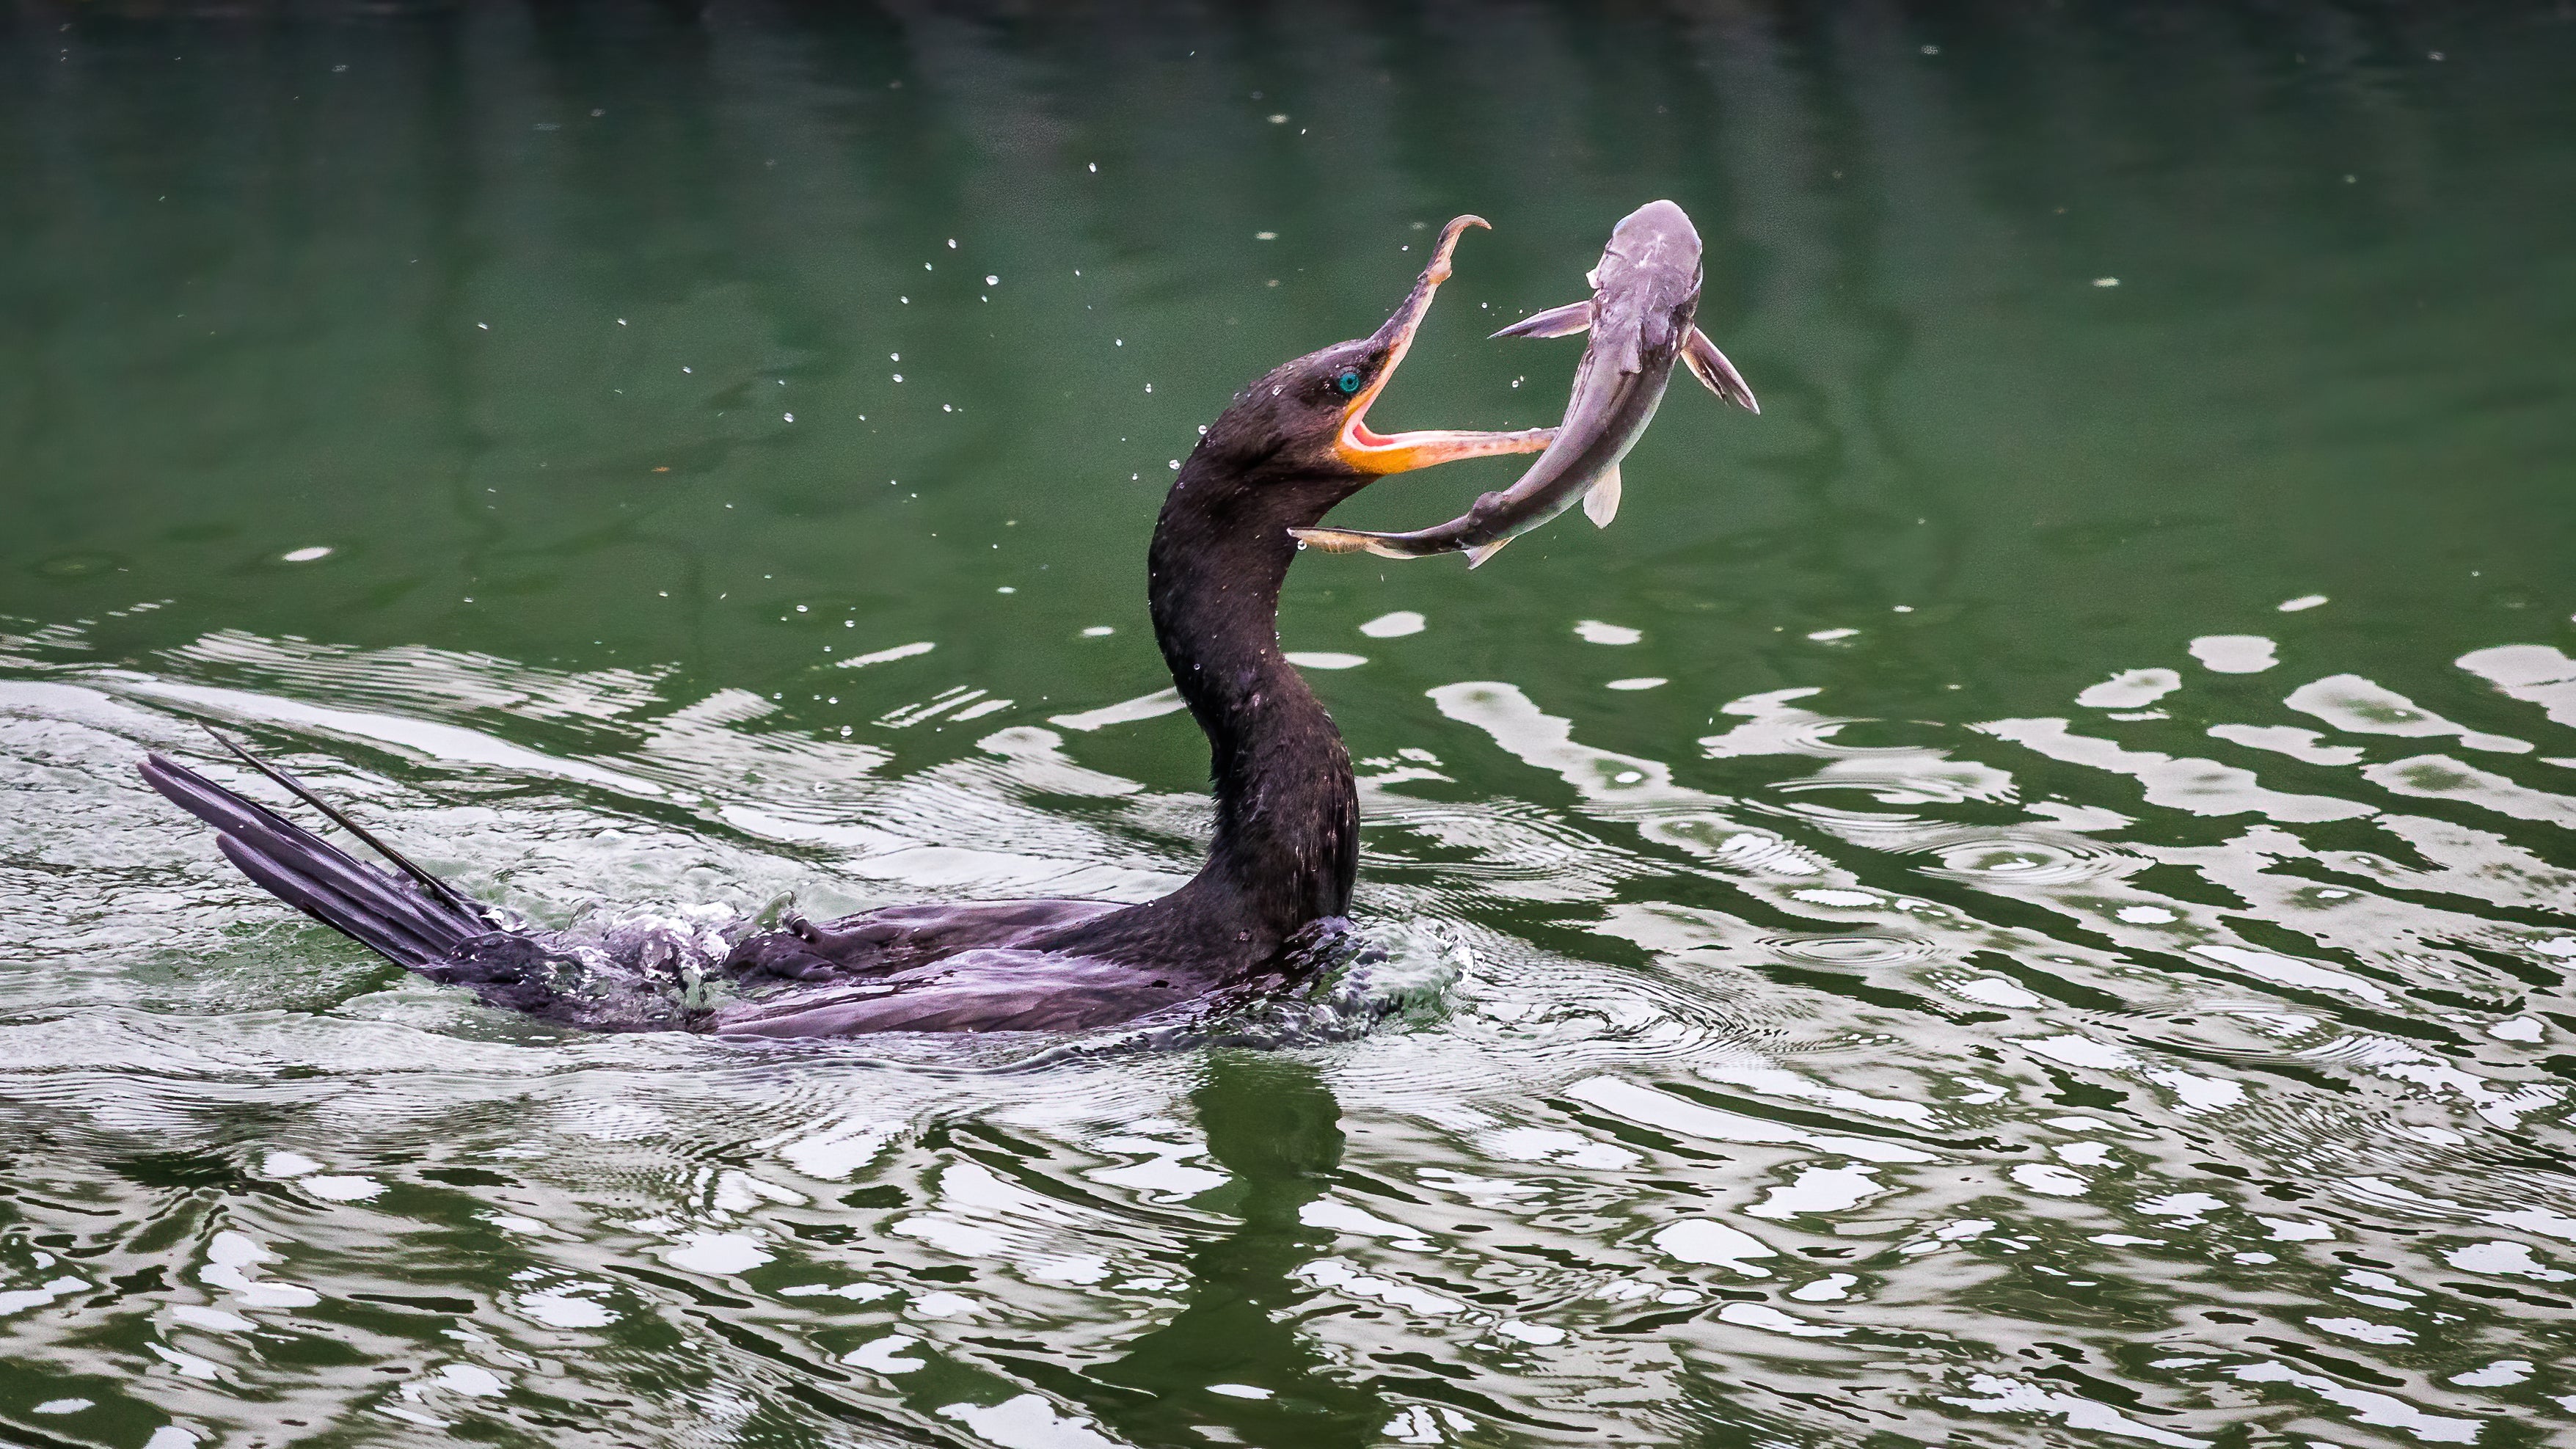 Browse Free HD Images of Bird Catches Fish In Its Beak While Floating In  The Water